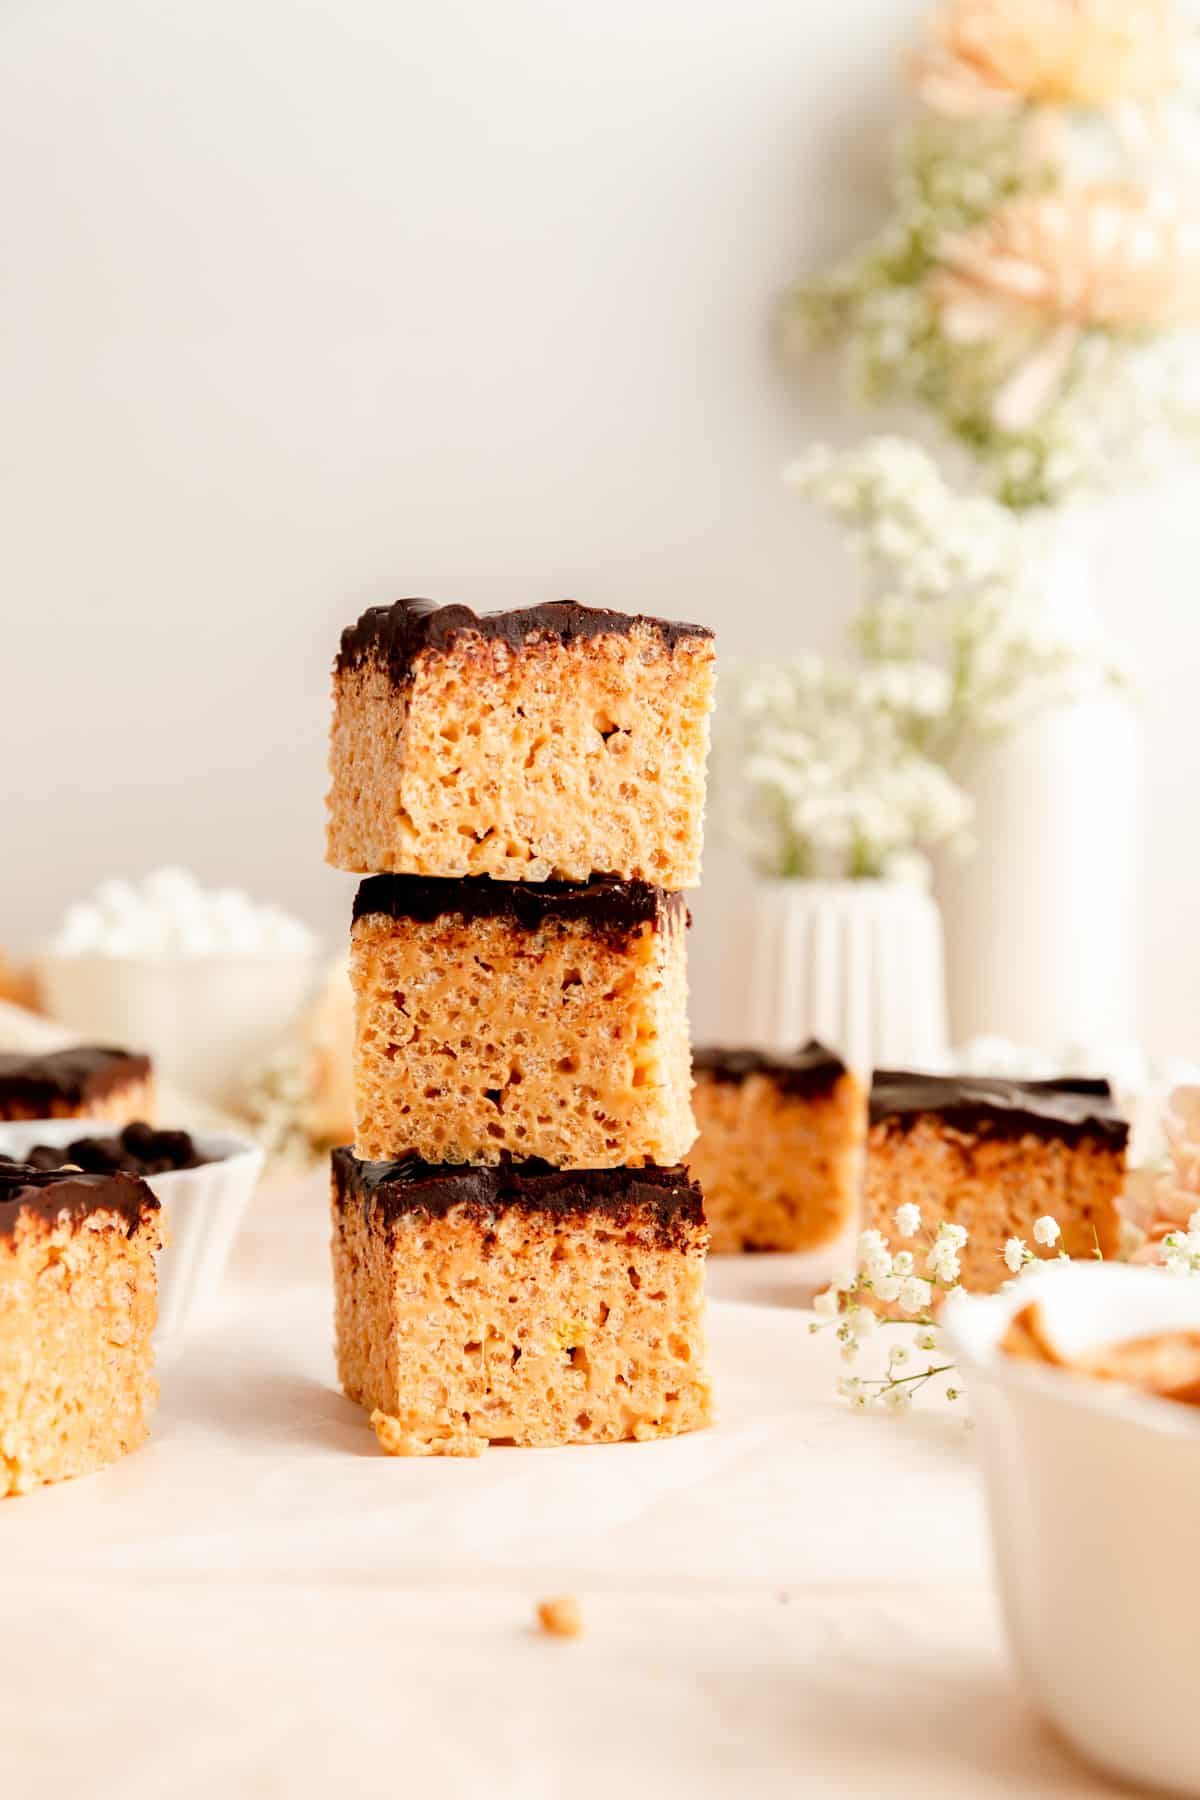 Stack of three rice krispie peanut butter bars with chocolate ganache and bars on table.